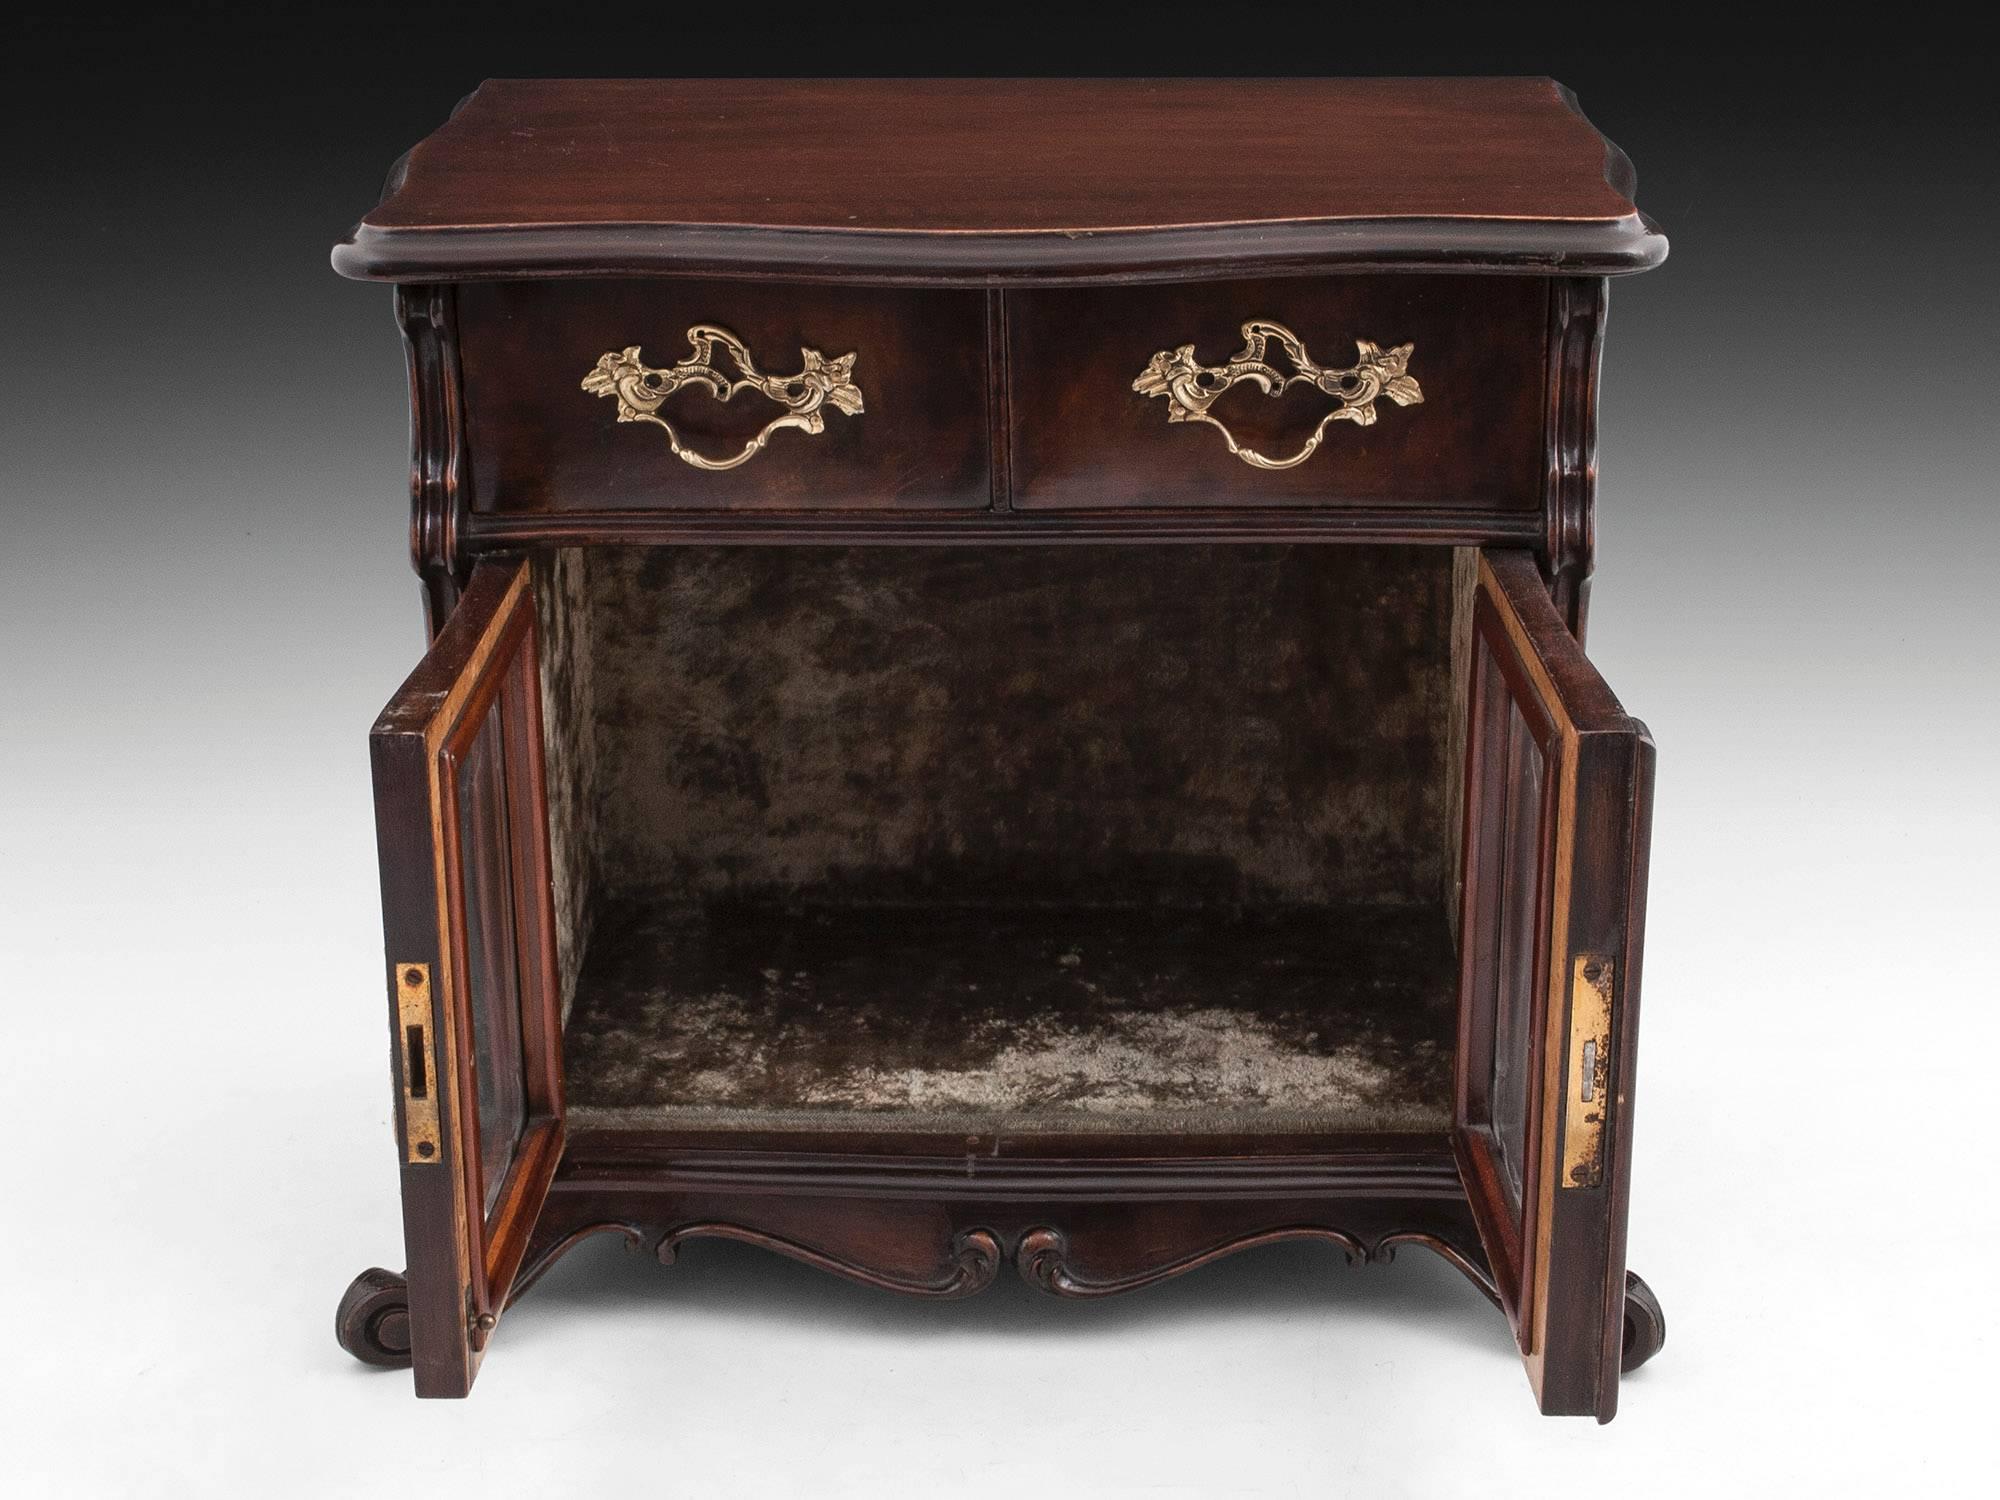 19th Century Antique Miniature Display or Jewellery Cabinet For Sale